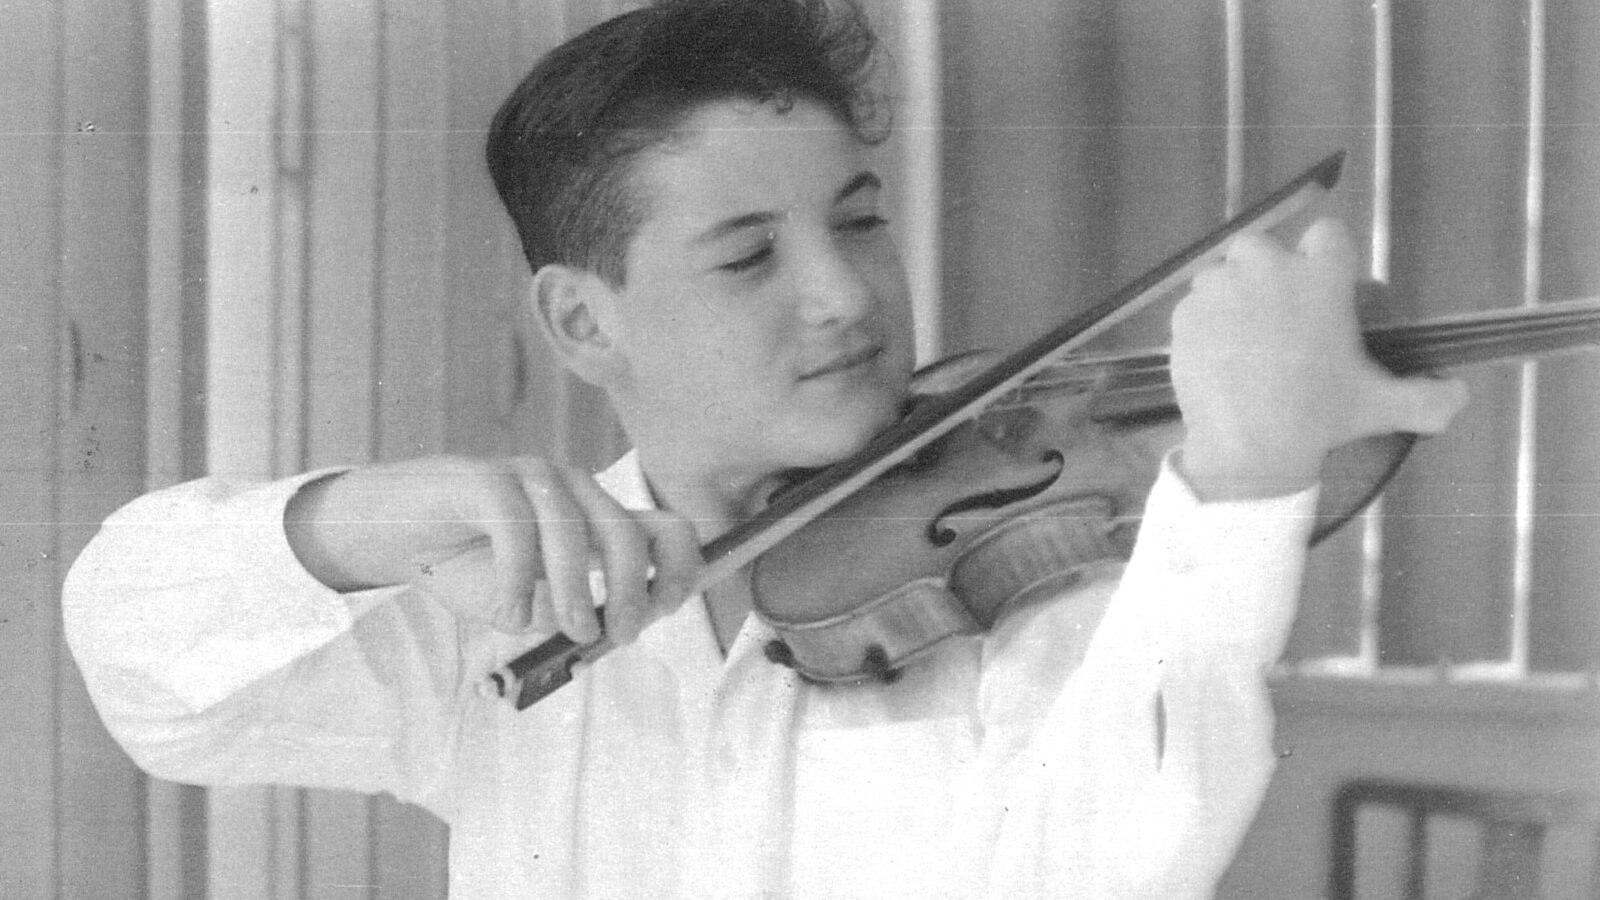 Pinchas Zukerman around the time Isaac Stern brought him to New York to study at Juilliard, c. 1962 (Photo courtesy of the artist)